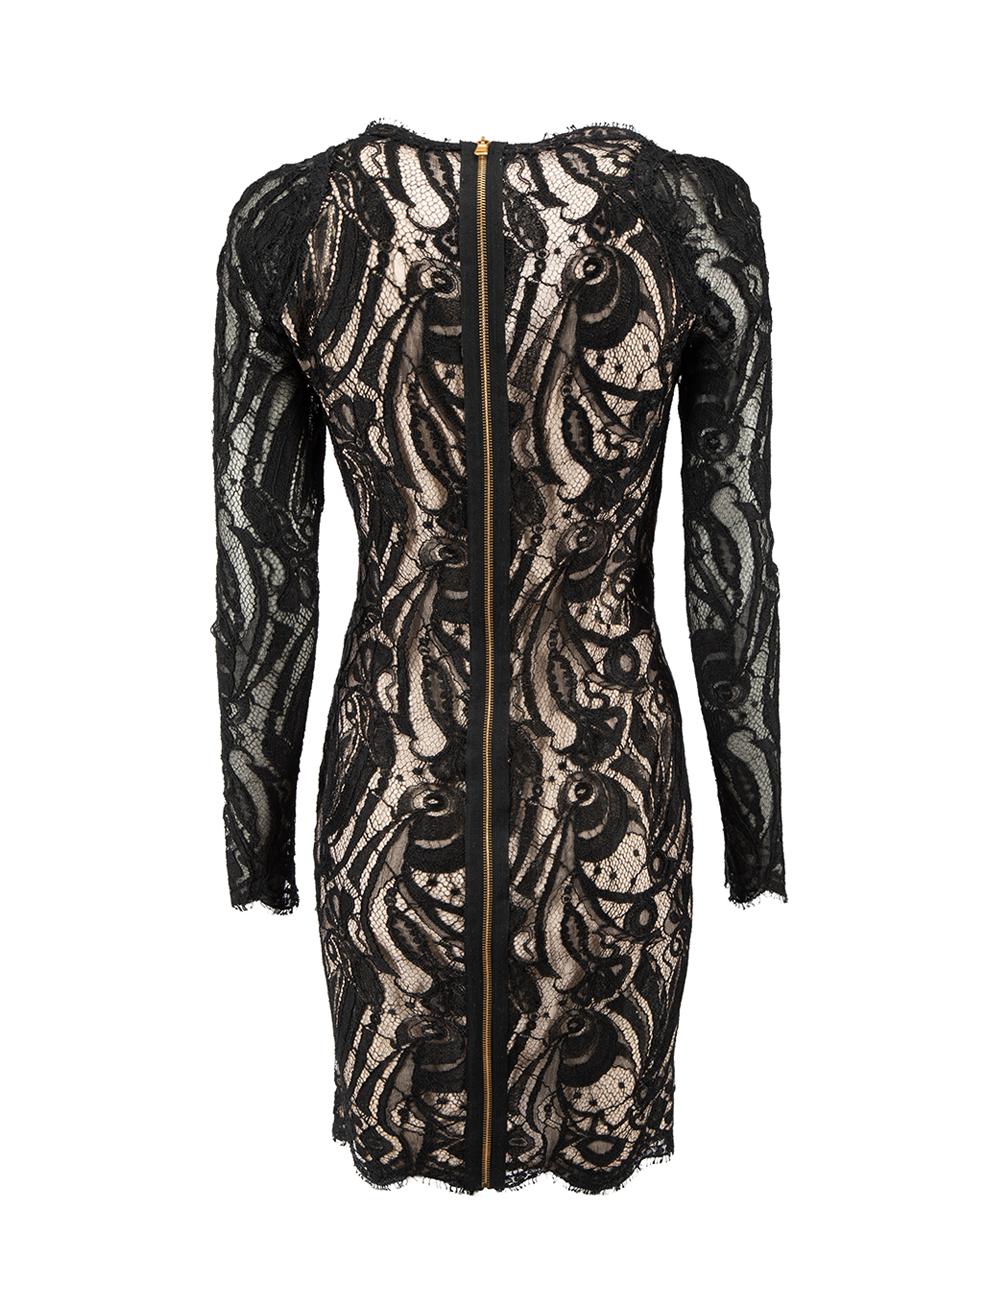 Emilio Pucci Black Lace Long Sleeve Mini Dress Size S In Good Condition In London, GB